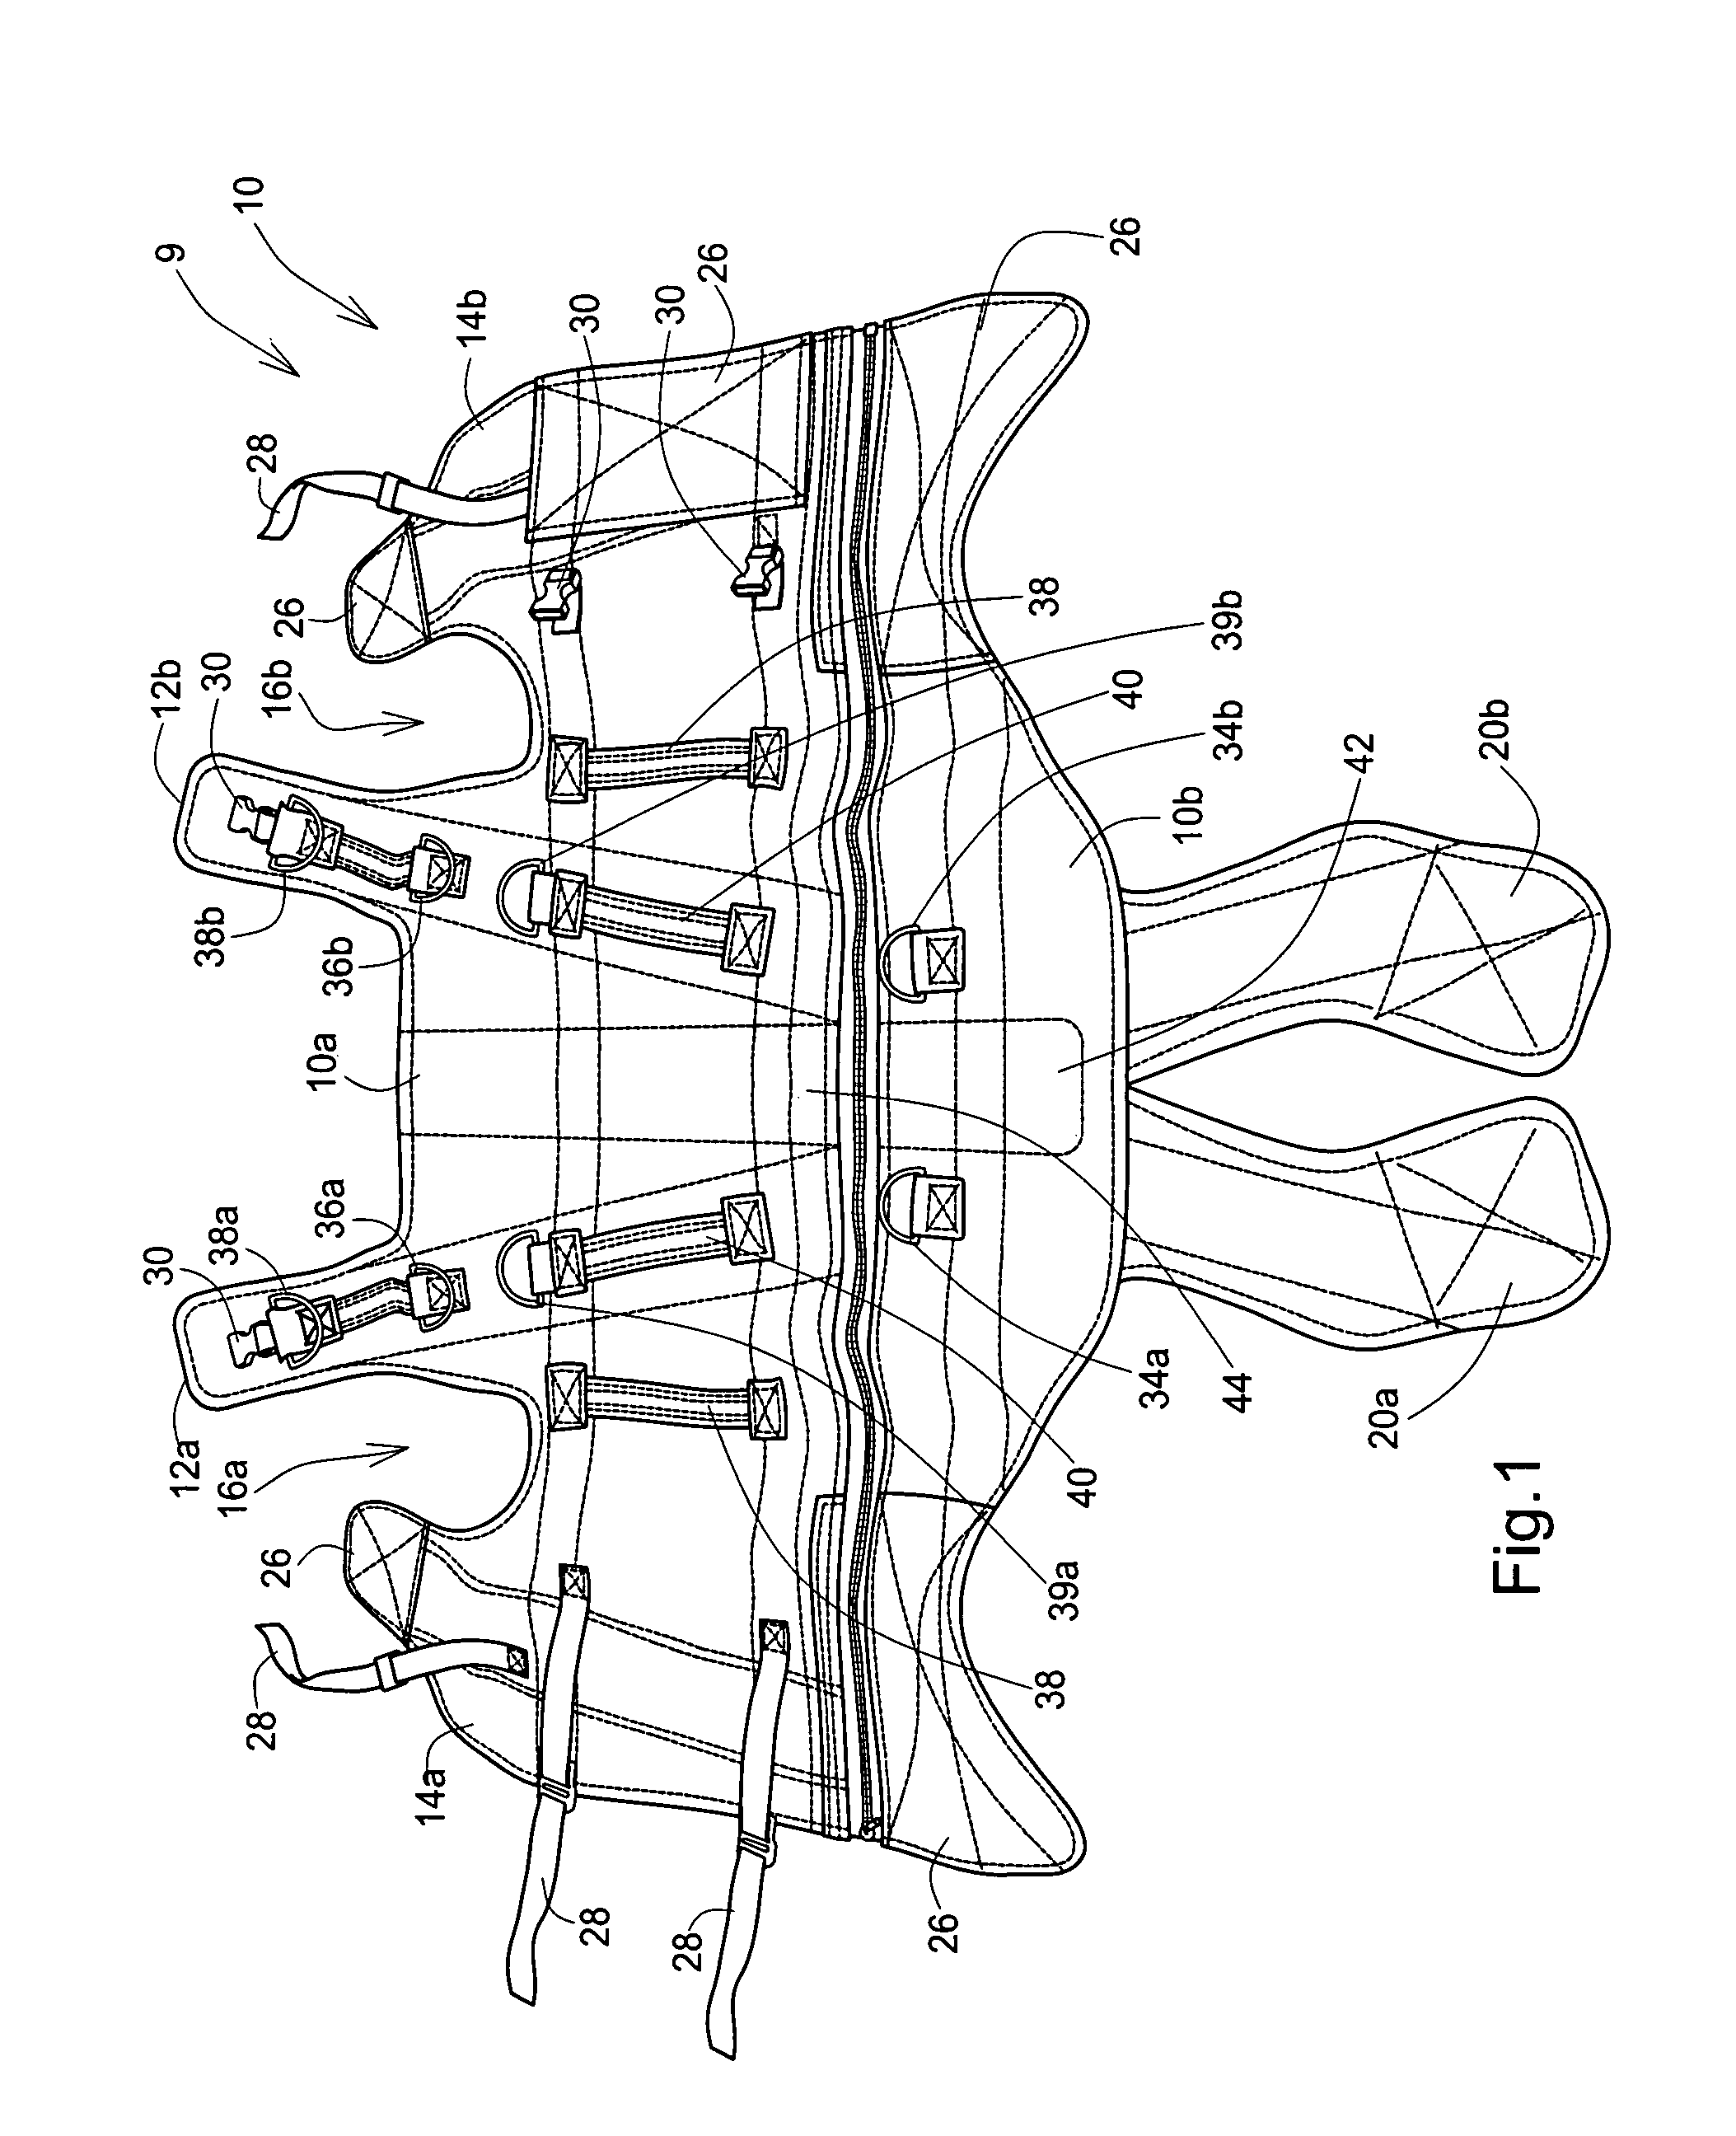 Unweighting assembly and support harness for unweighting a patient during rehabilitation